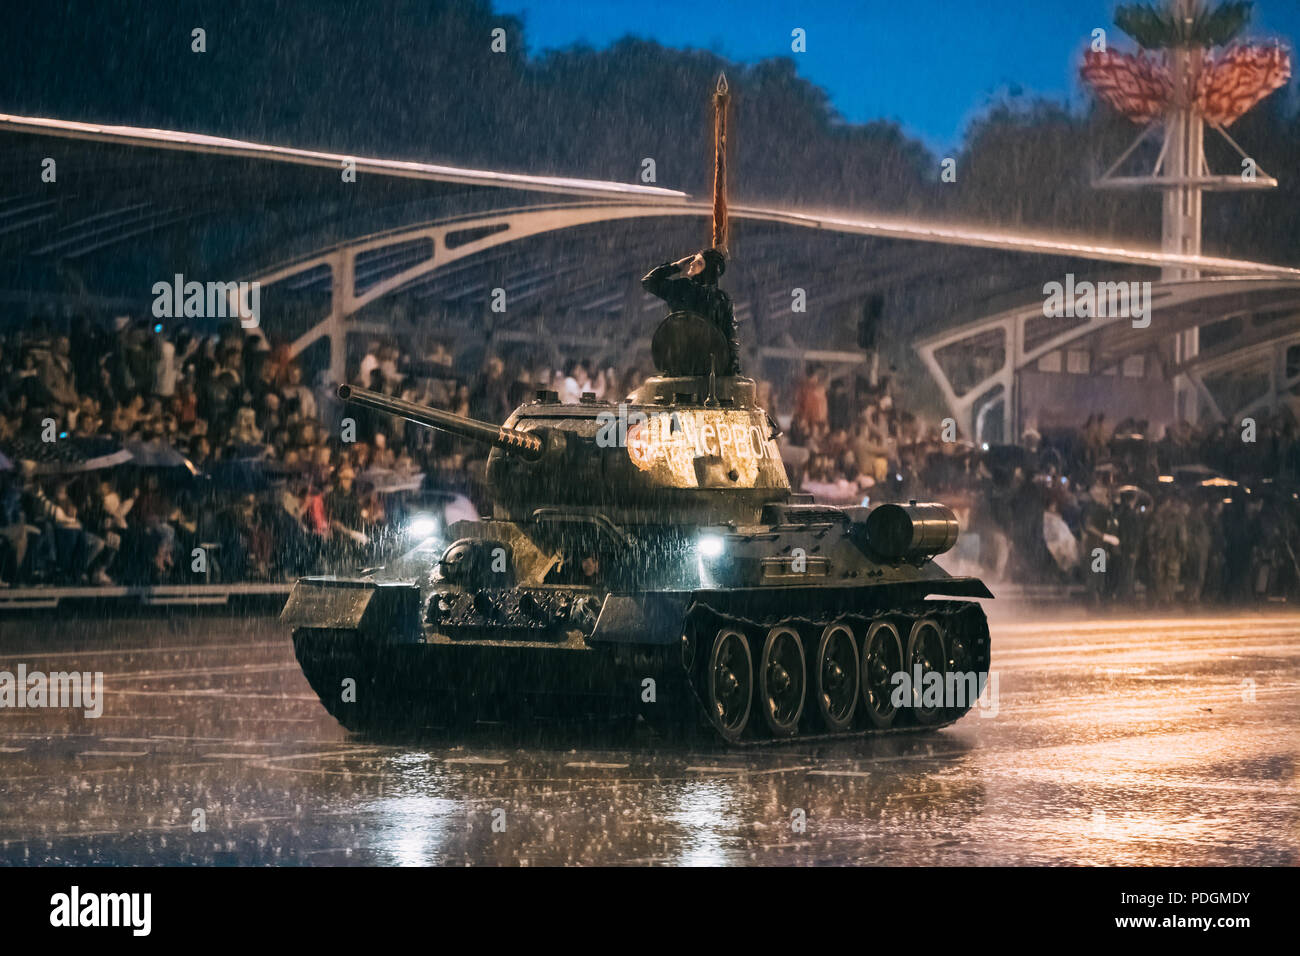 Minsk, Belarus- June 28, 2017: Military T-34-85 Tank Moving At Street During Rehearsal Of Parafe Before Celebration Of Independence Day Of Belarus. Ev Stock Photo